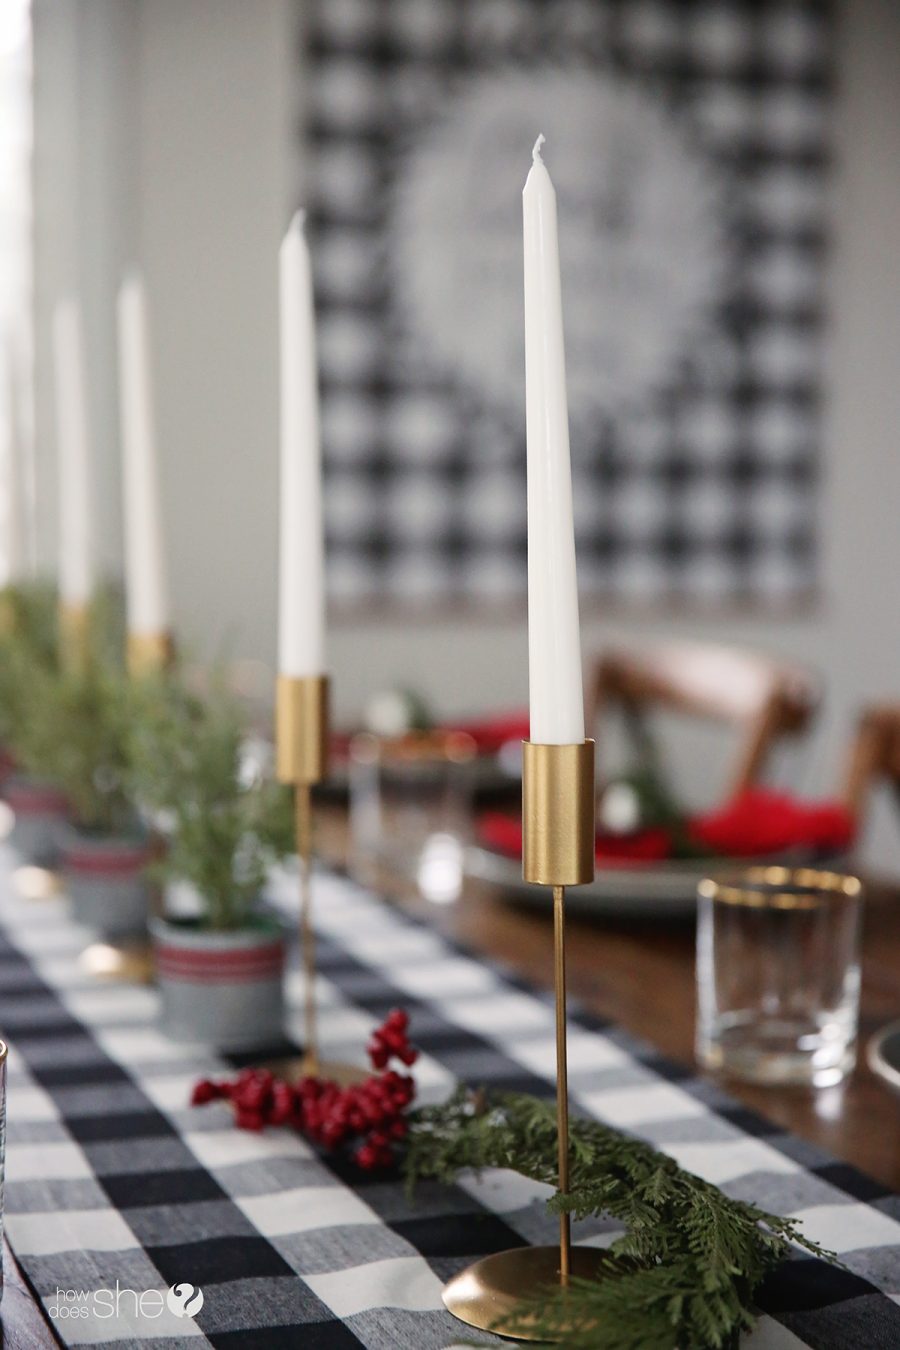 Welcoming Holiday Guests with a Rustic Tablescape from Walmart